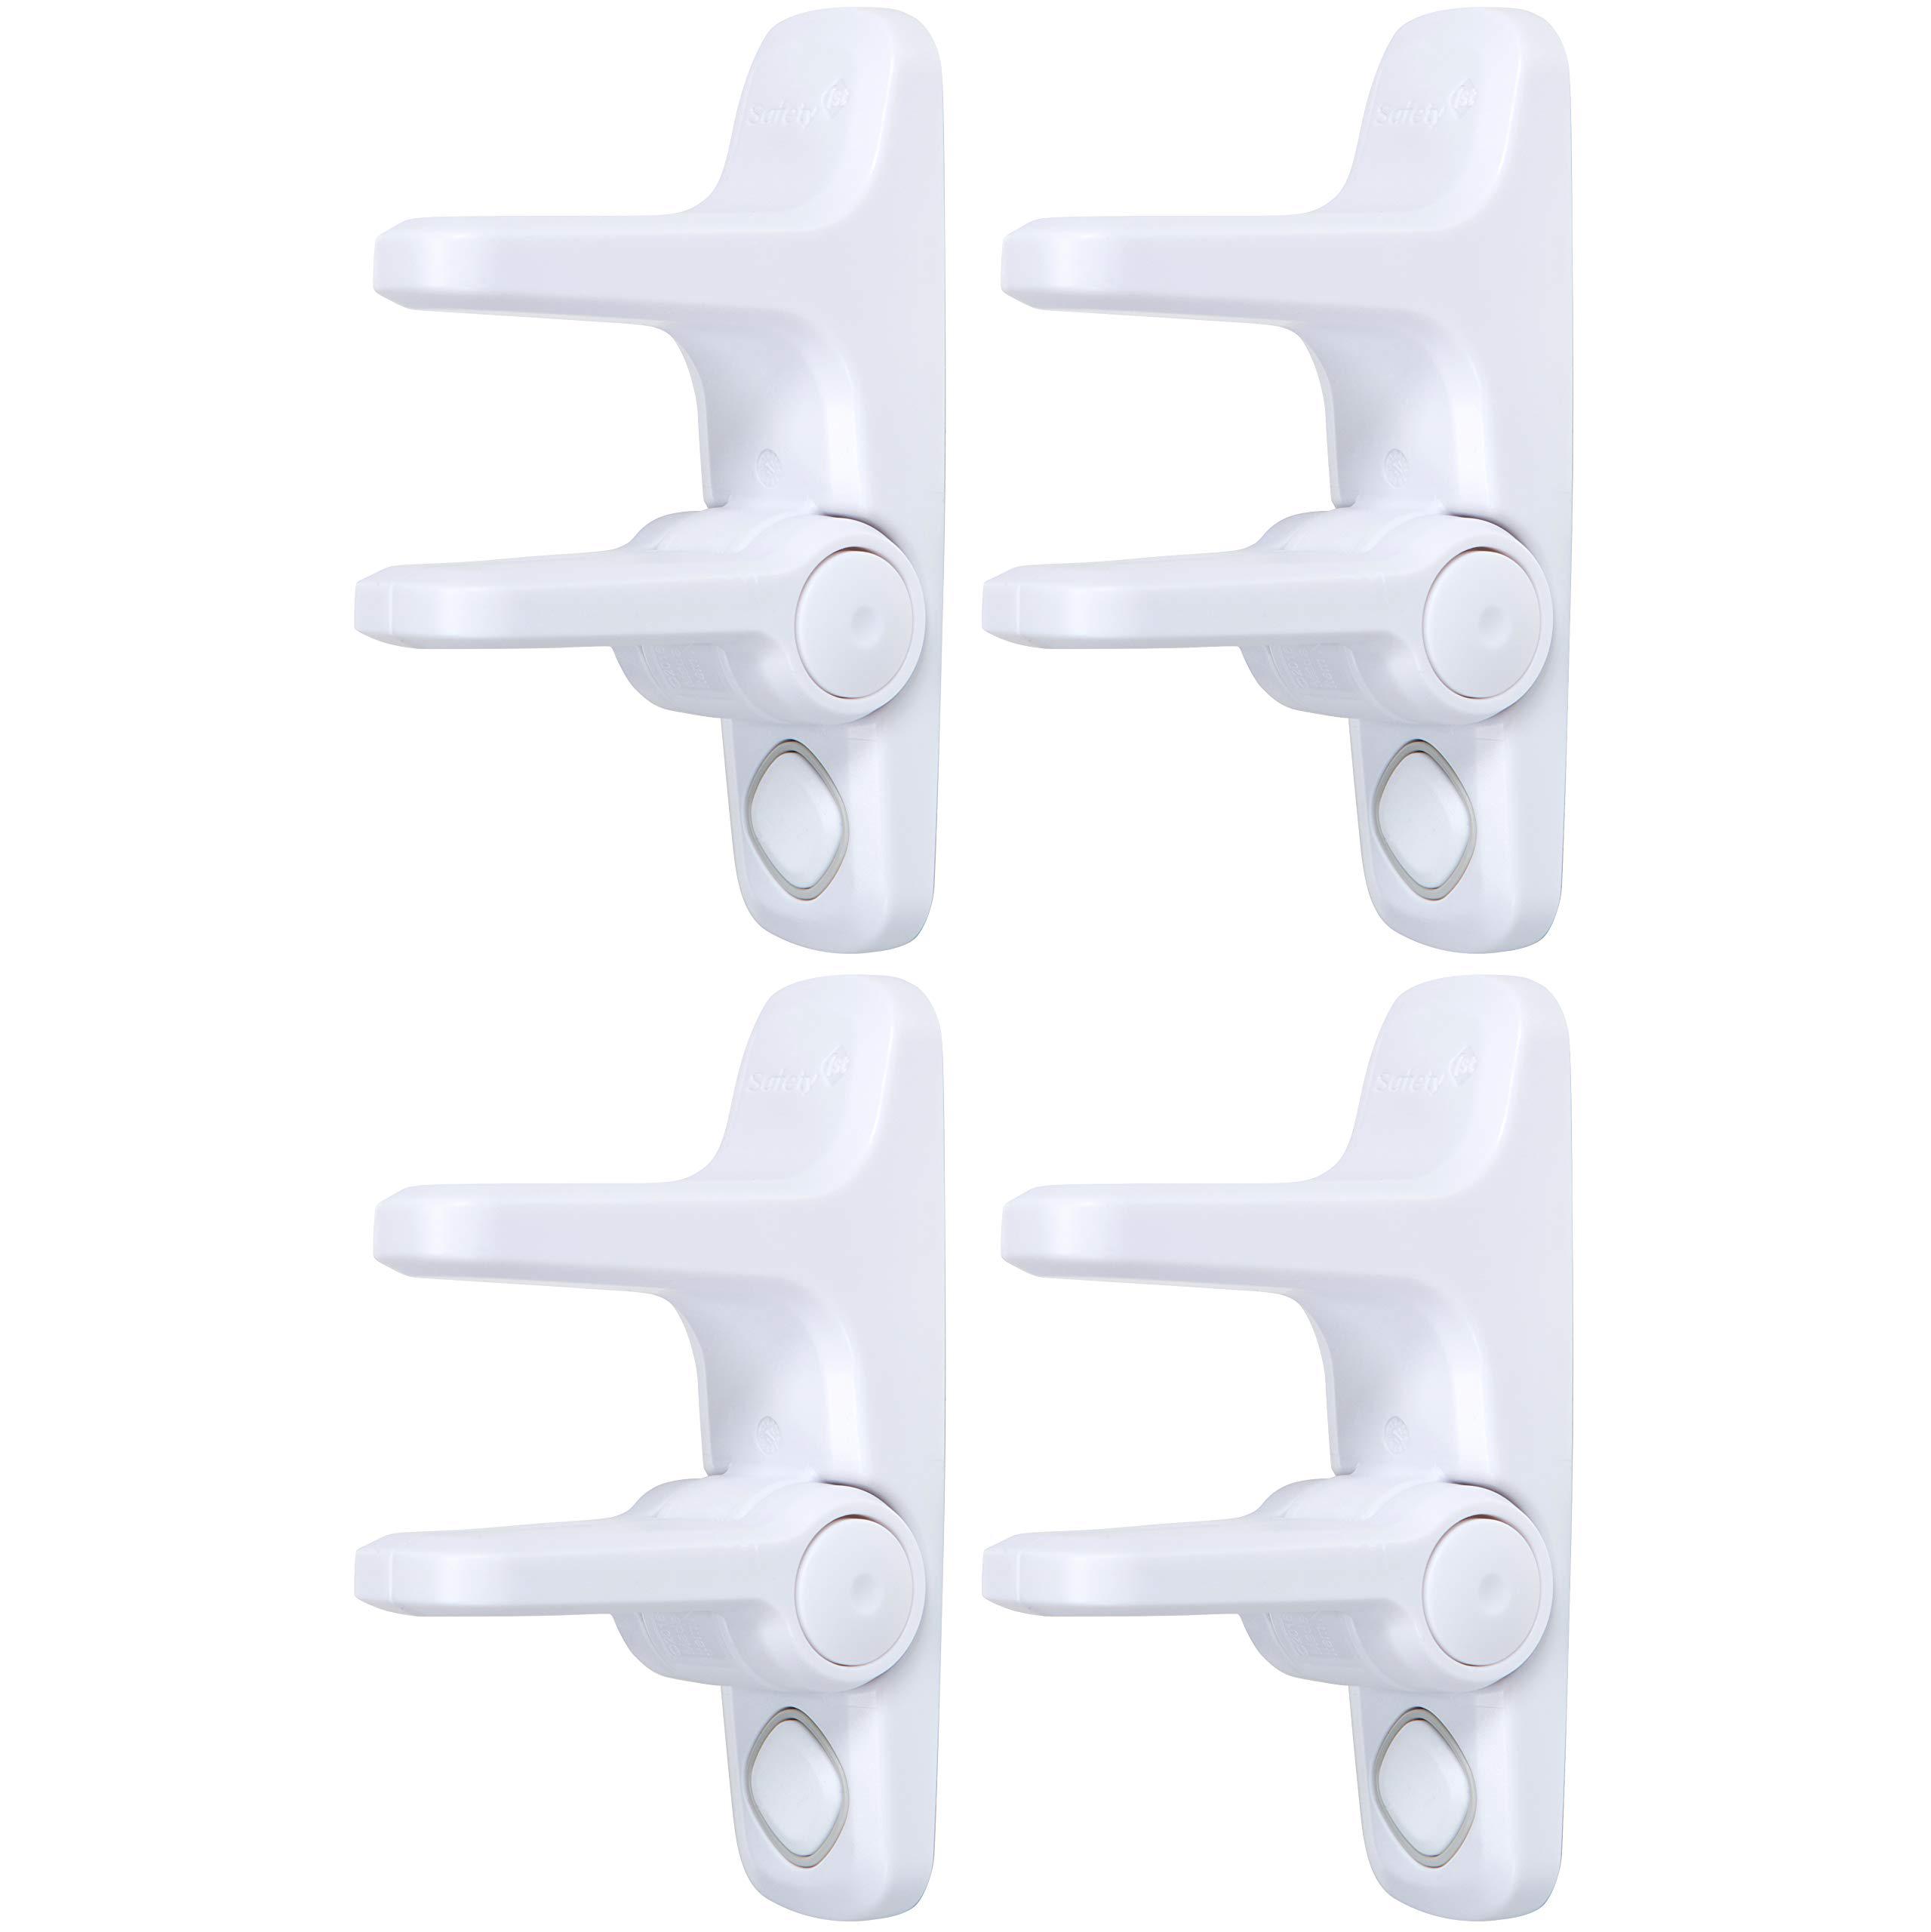 safety 1st outsmart lever handle lock, white, 4pk